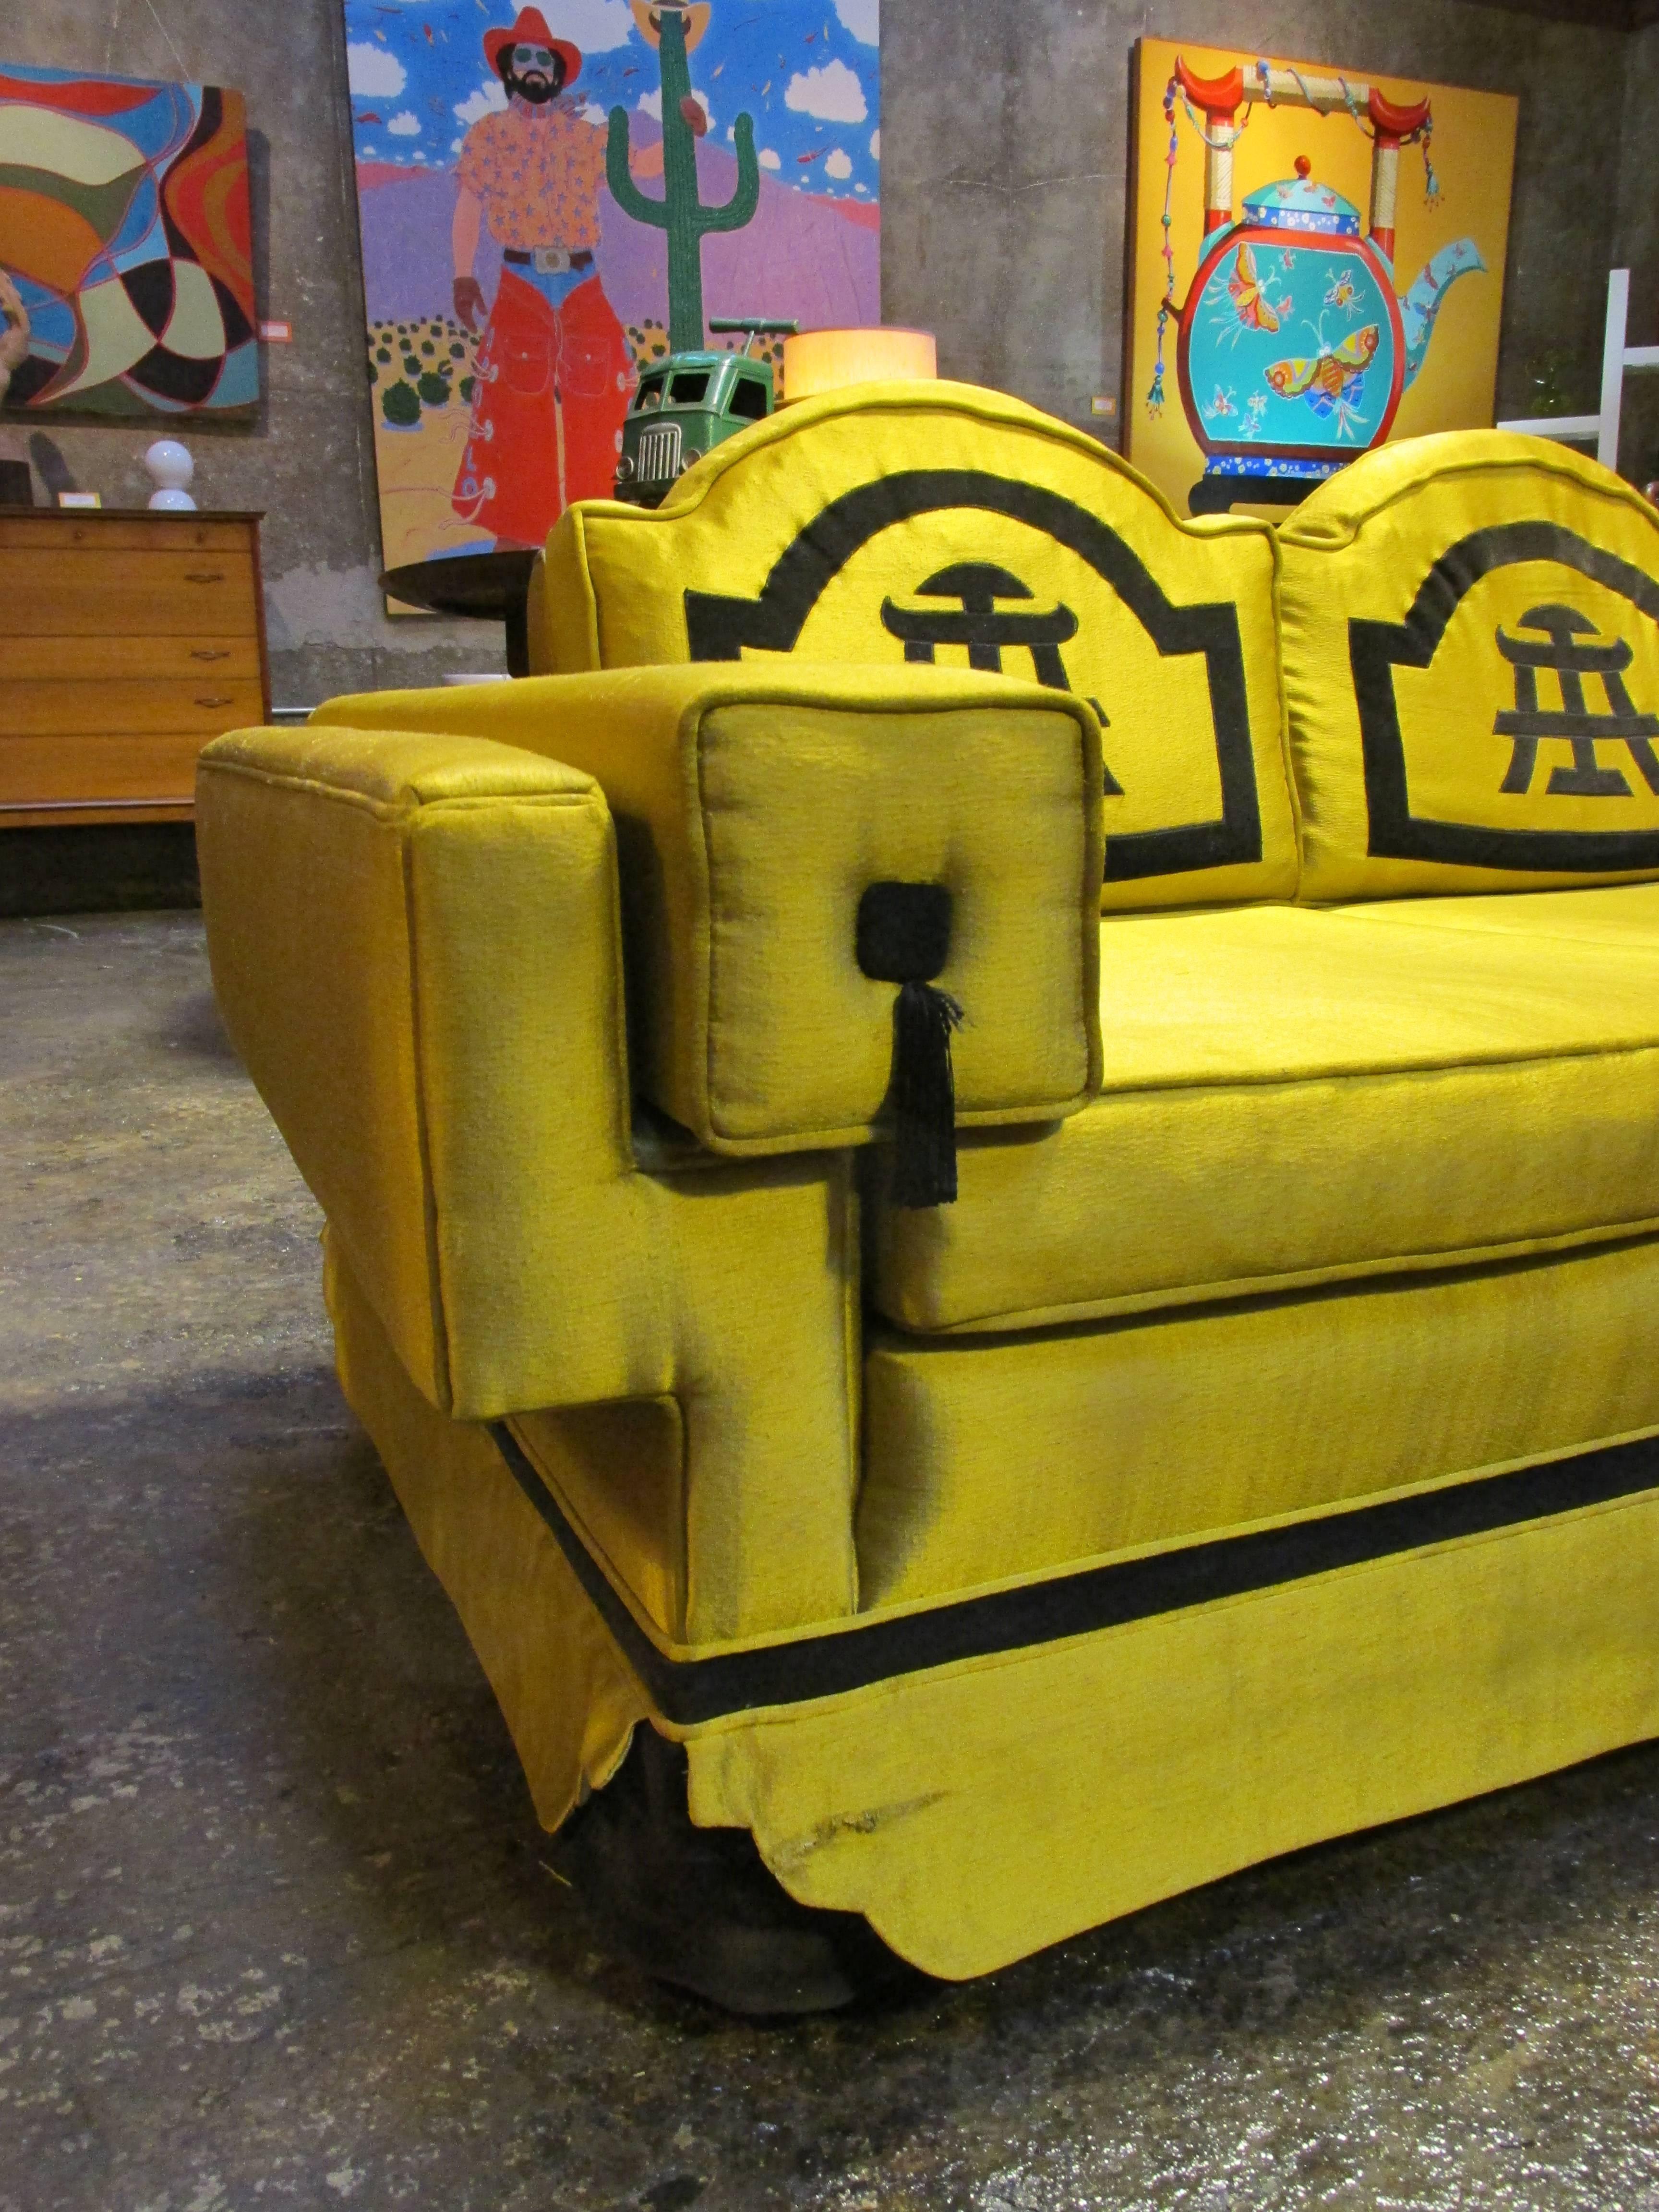 Classic oriental design to this 1950s American made sofa. Solid wood frame construction. A good, vintage template to reupholster and create a truly striking statement piece.